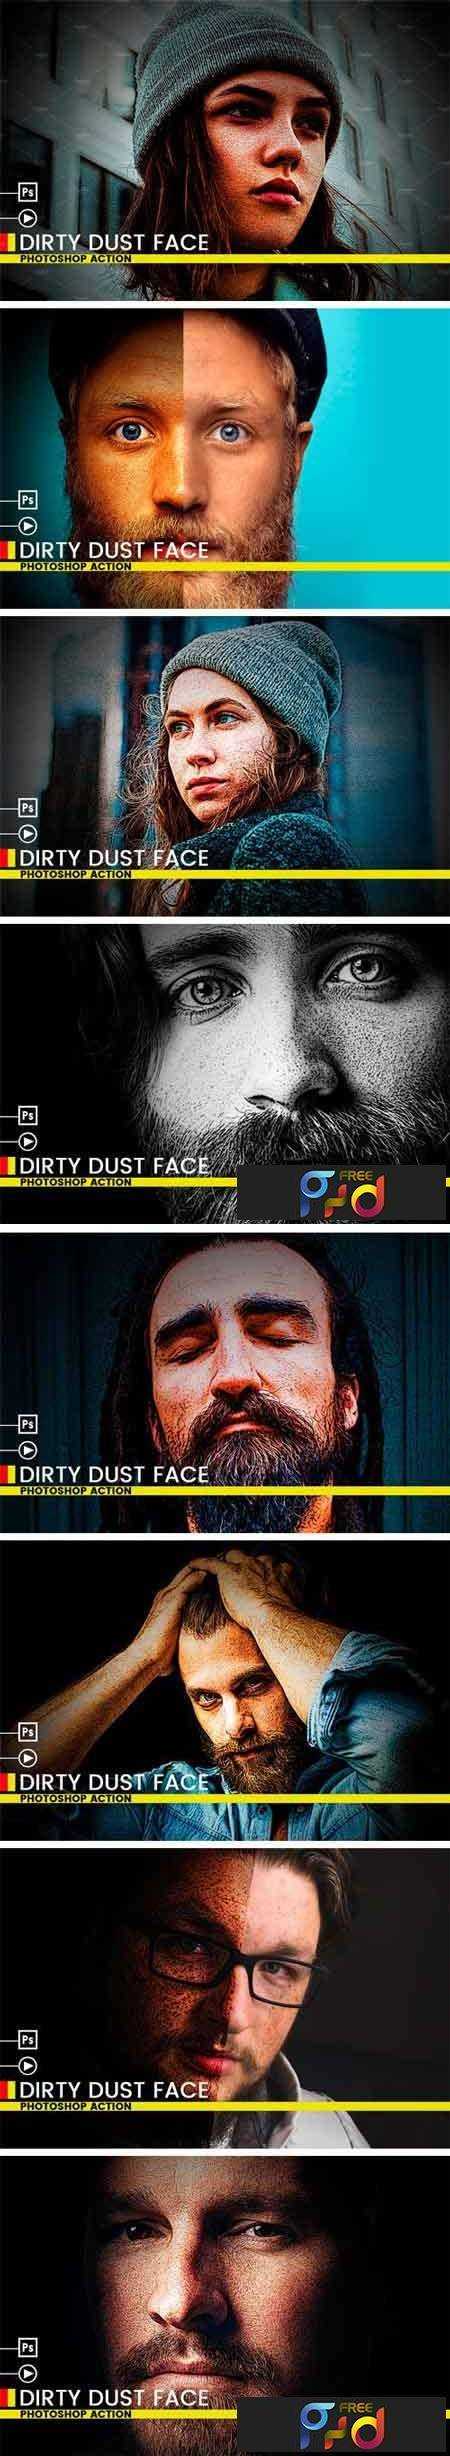 Dirty Dust Face Photoshop Action